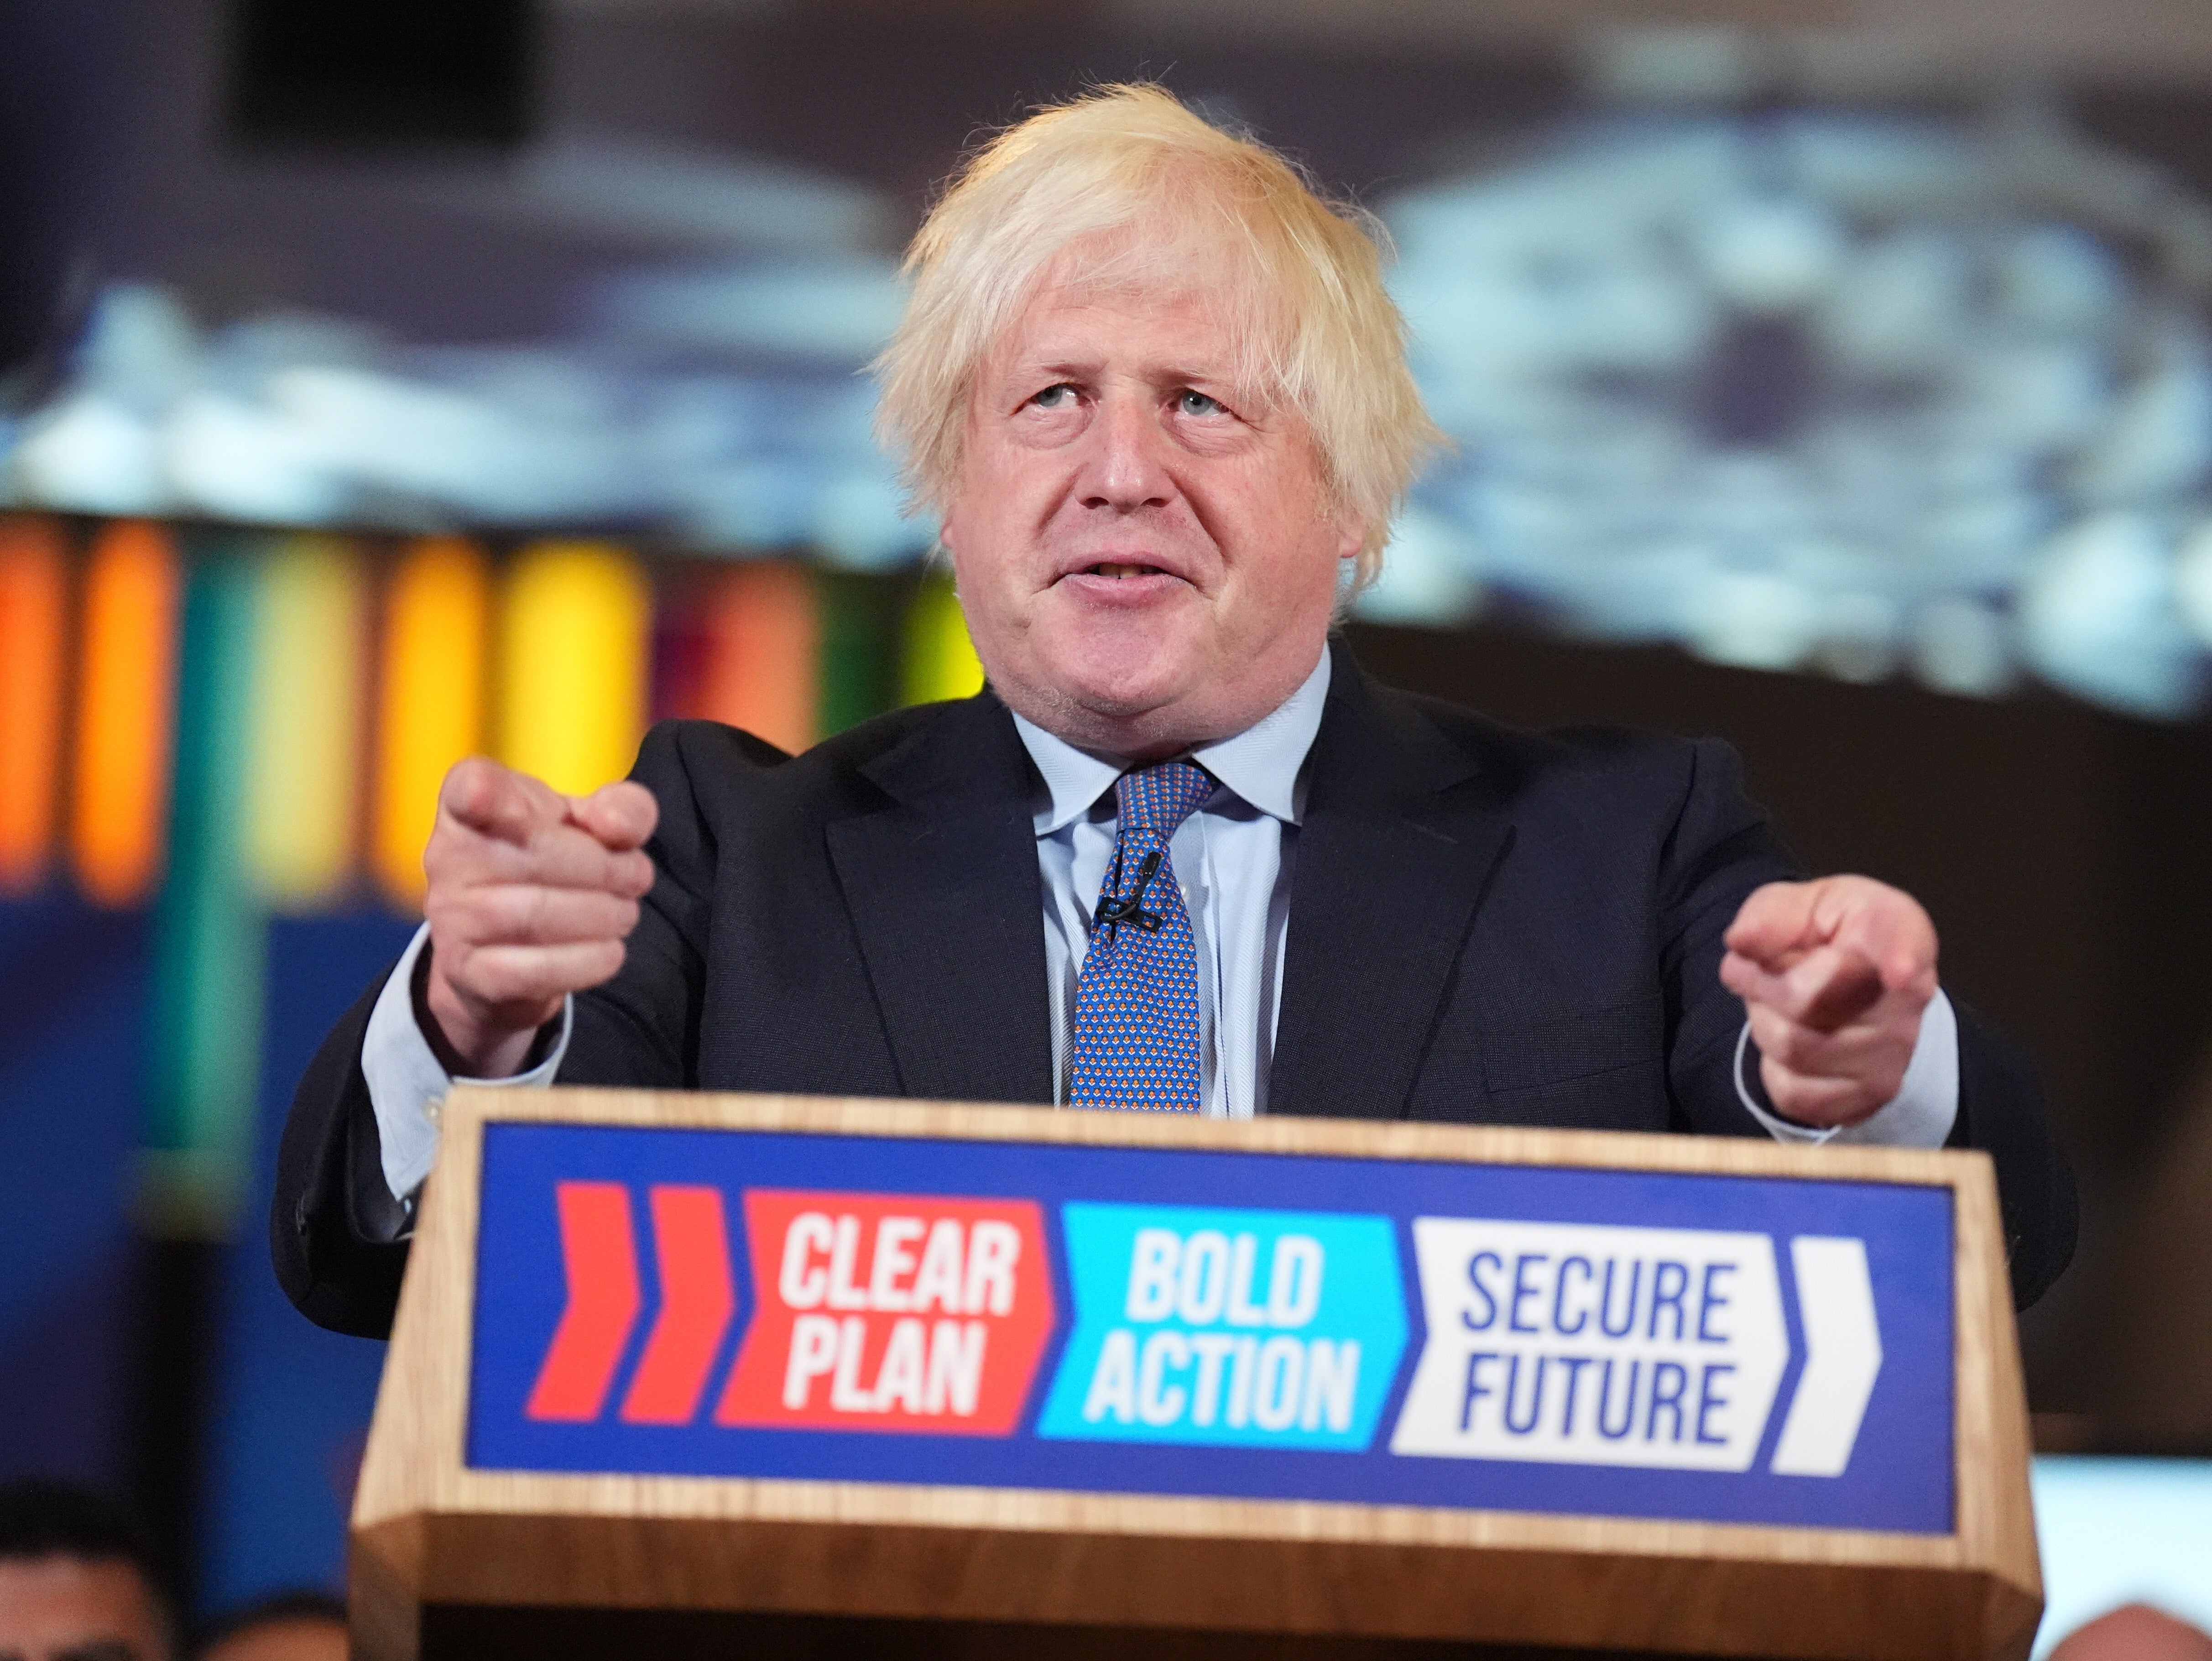 Former prime minister Boris Johnson spoke on behalf of the Conservatives at the National Army Museum in London